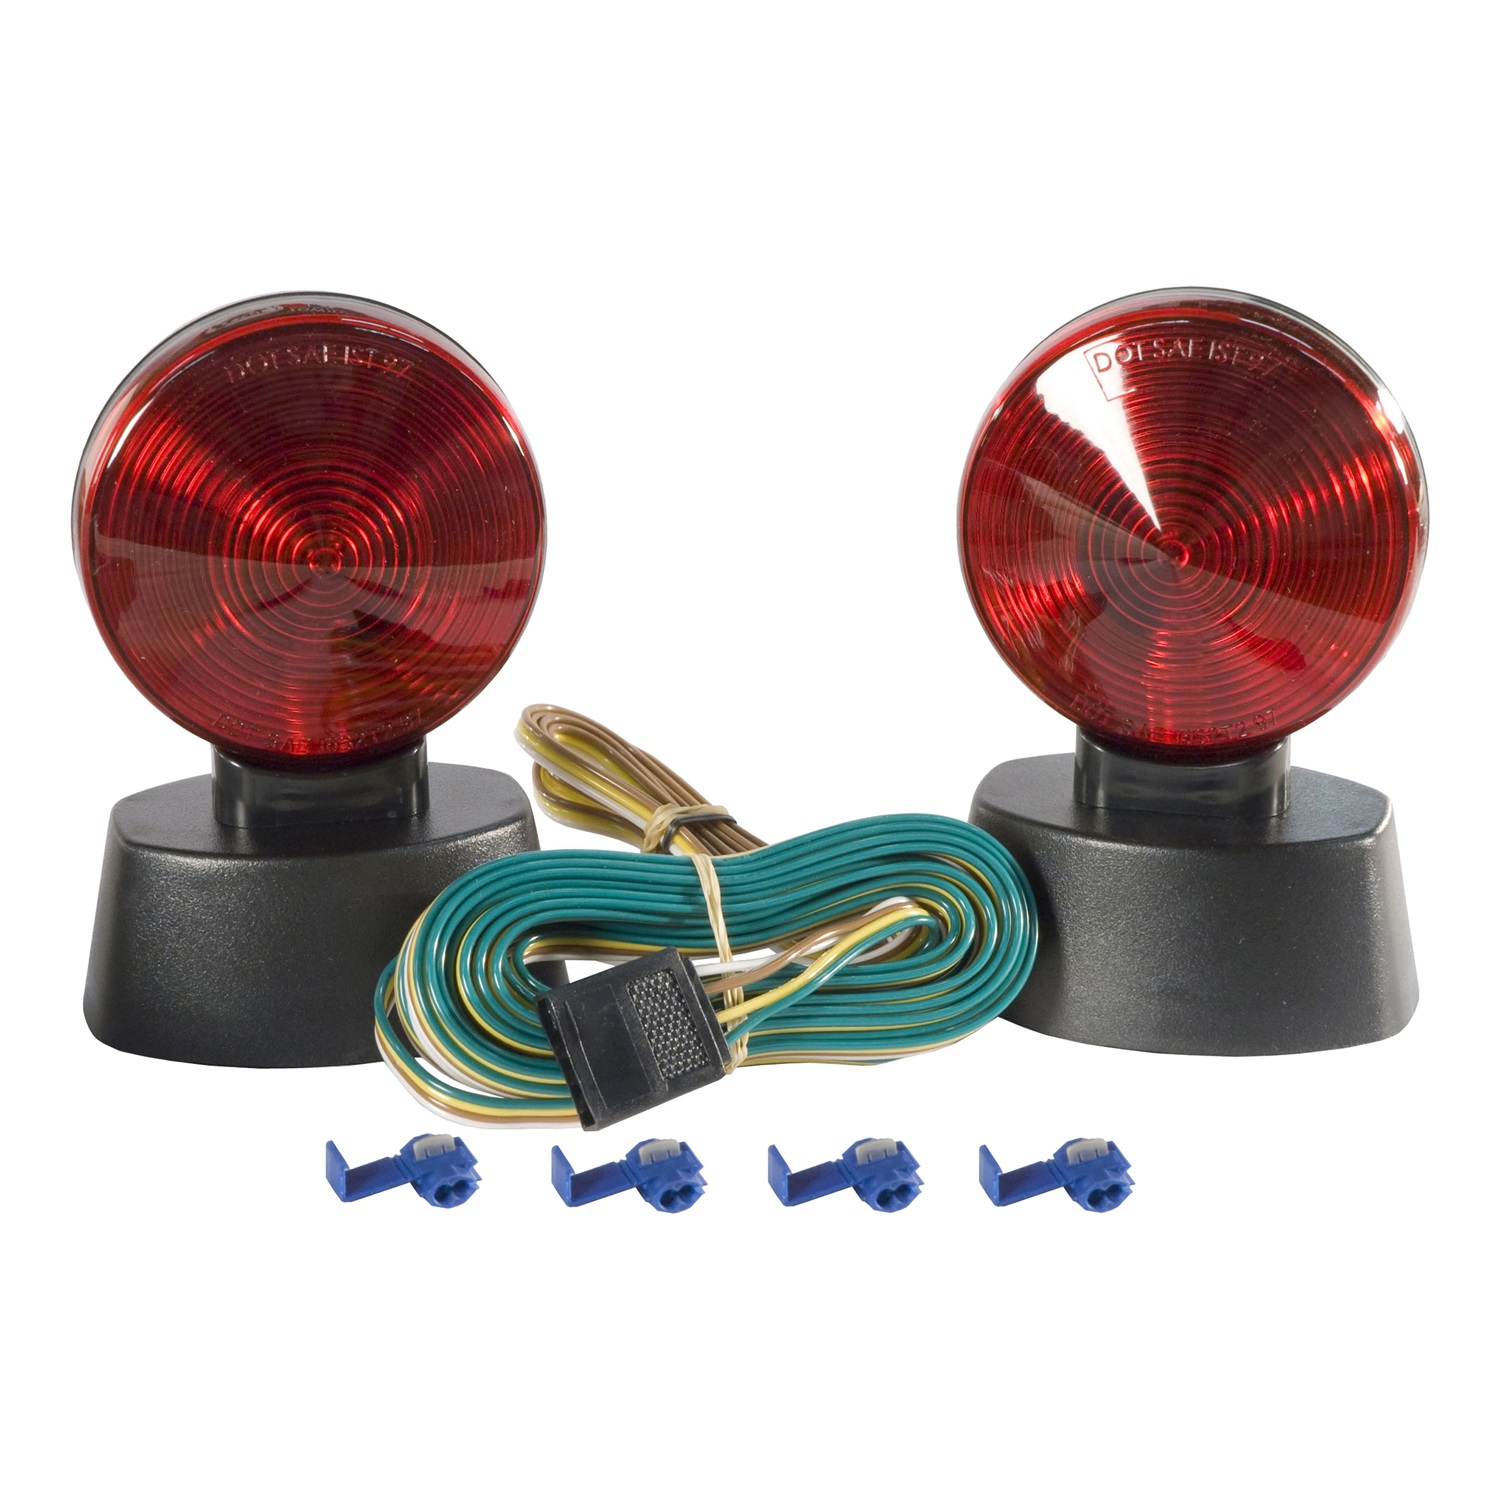 CURT Manufacturing CURT Manufacturing 53204 Magnetic Base Towing Light Kit  Fits